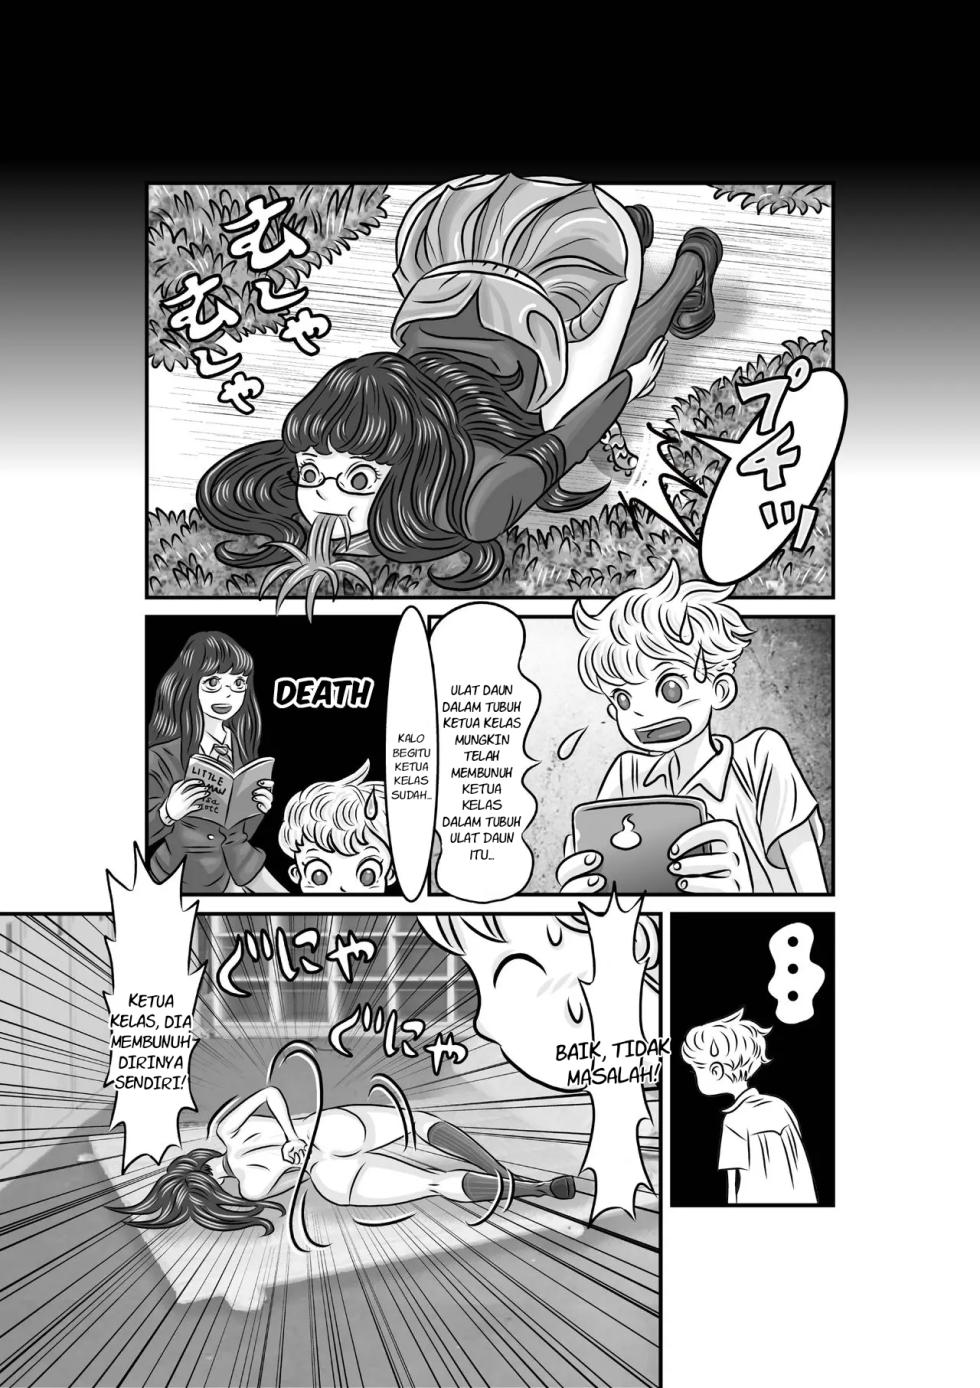 [jpeg] A Swap of President! [Indonesia] - Page 10